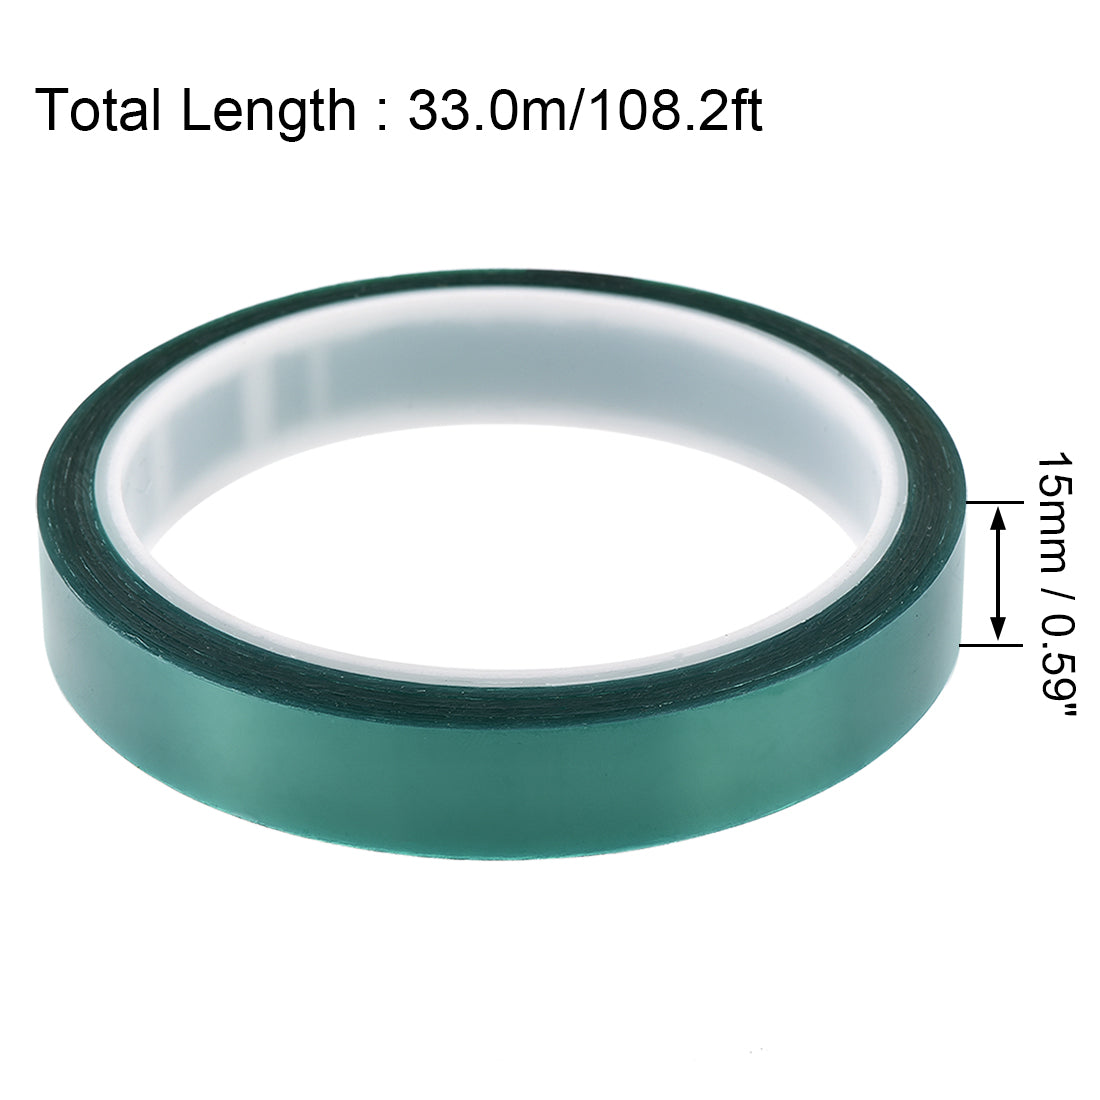 uxcell Uxcell 15mm PET Tape Green High Temperature Tape 33.0m/108.2ft 2 Roll